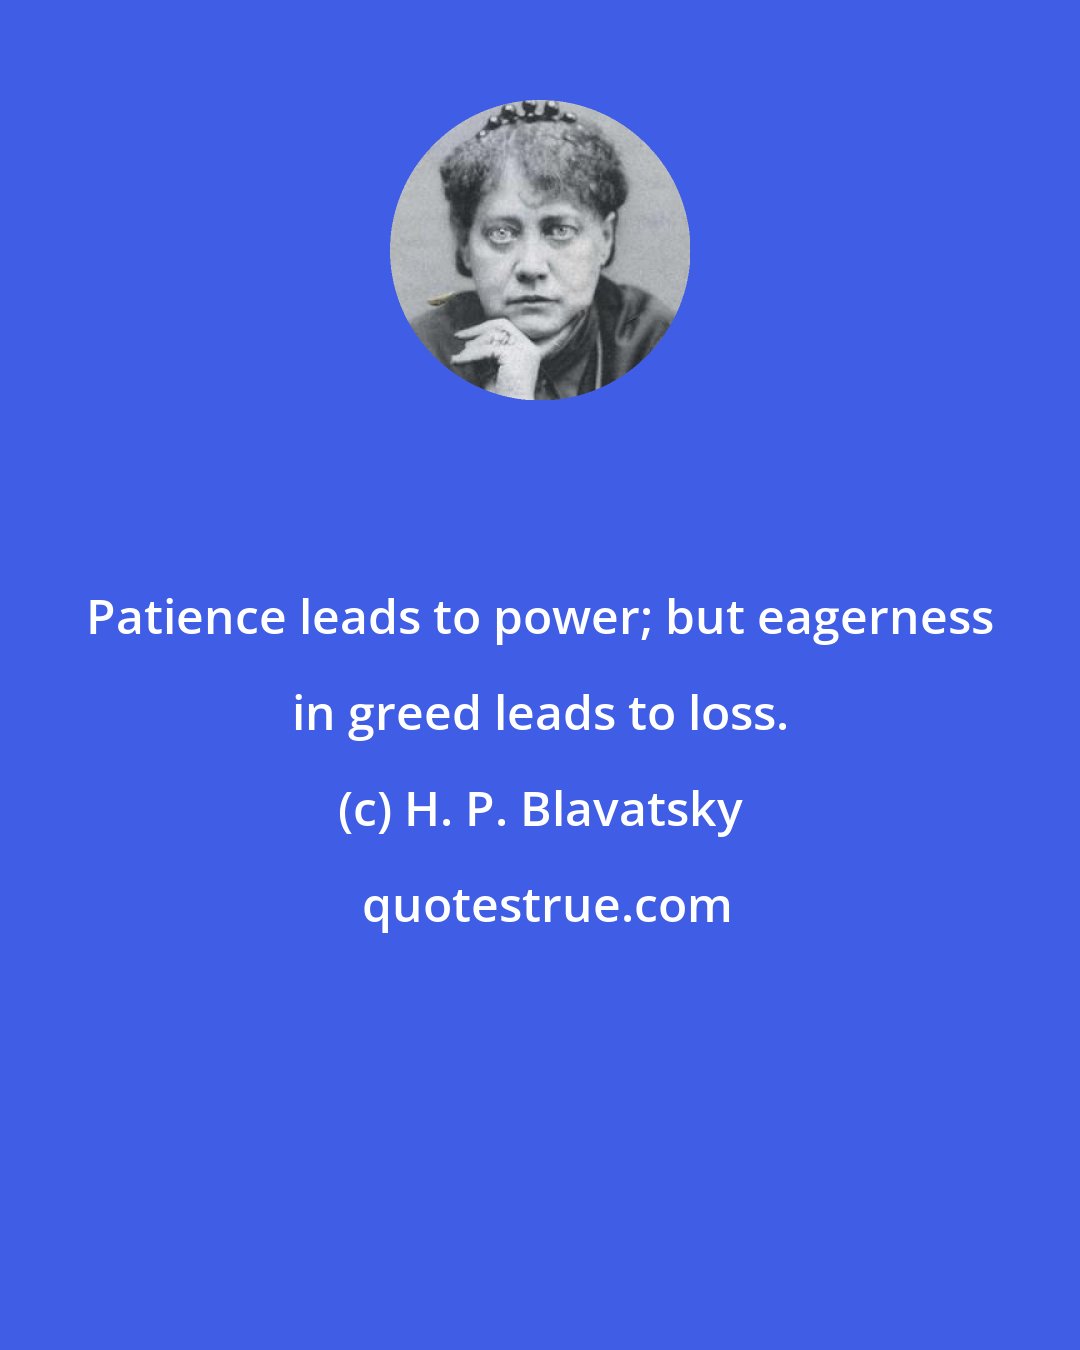 H. P. Blavatsky: Patience leads to power; but eagerness in greed leads to loss.